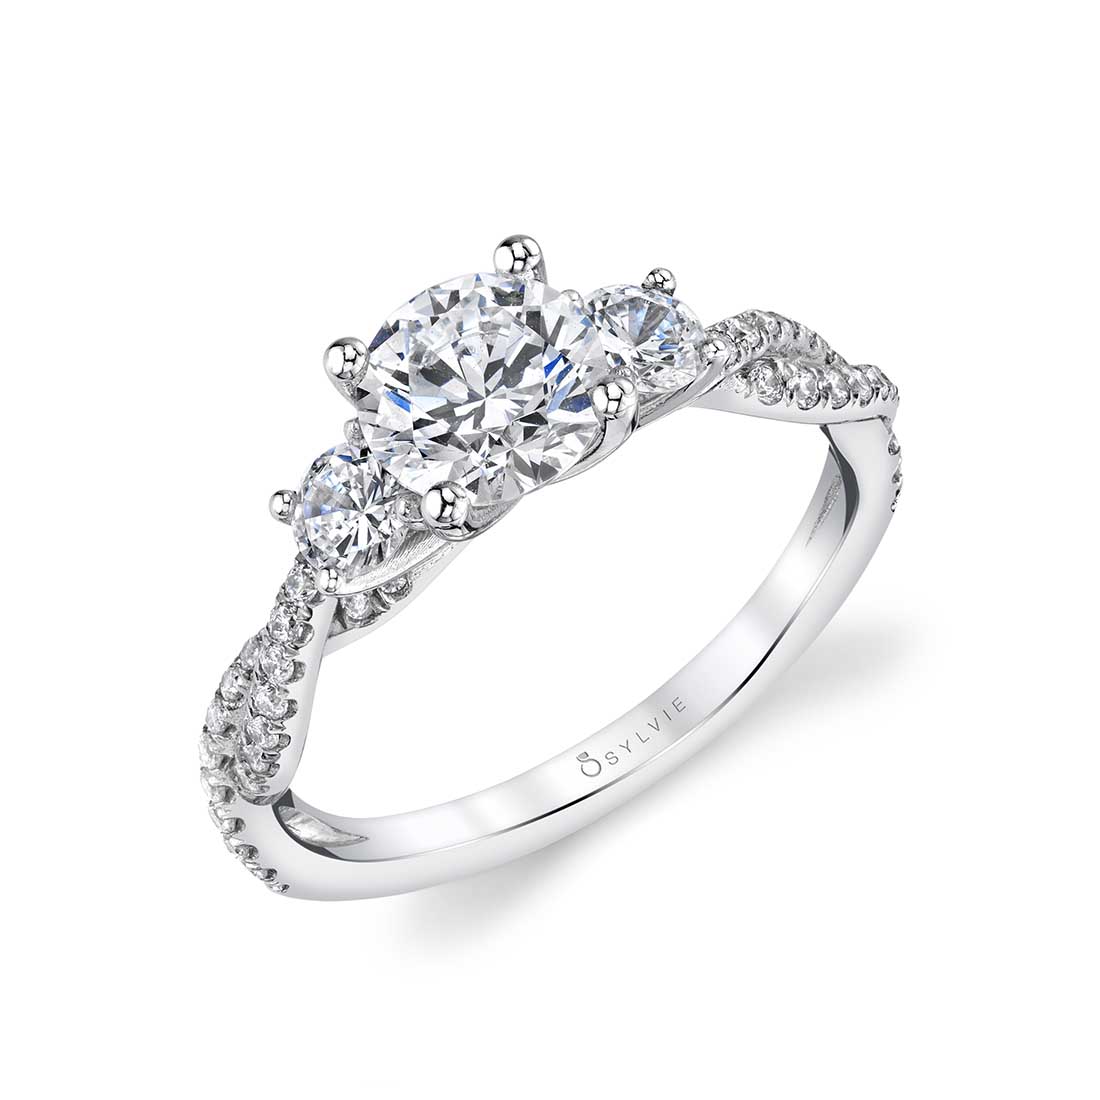 3 Stone Engagement Ring in White Gold - Gina - Sylvie